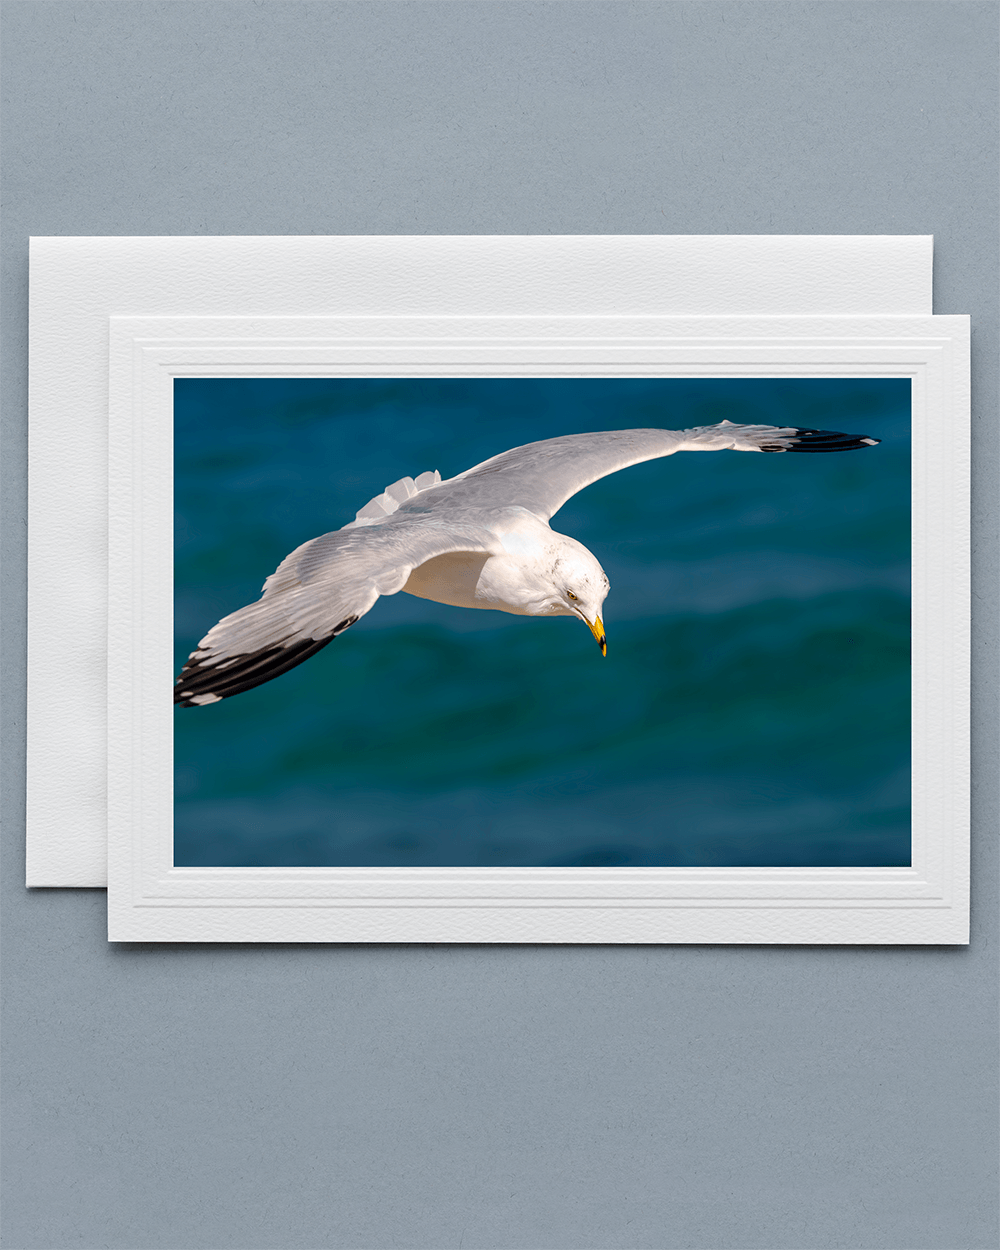 Lavilo Greeting Card - Front Image of a Seagull Over the Ocean